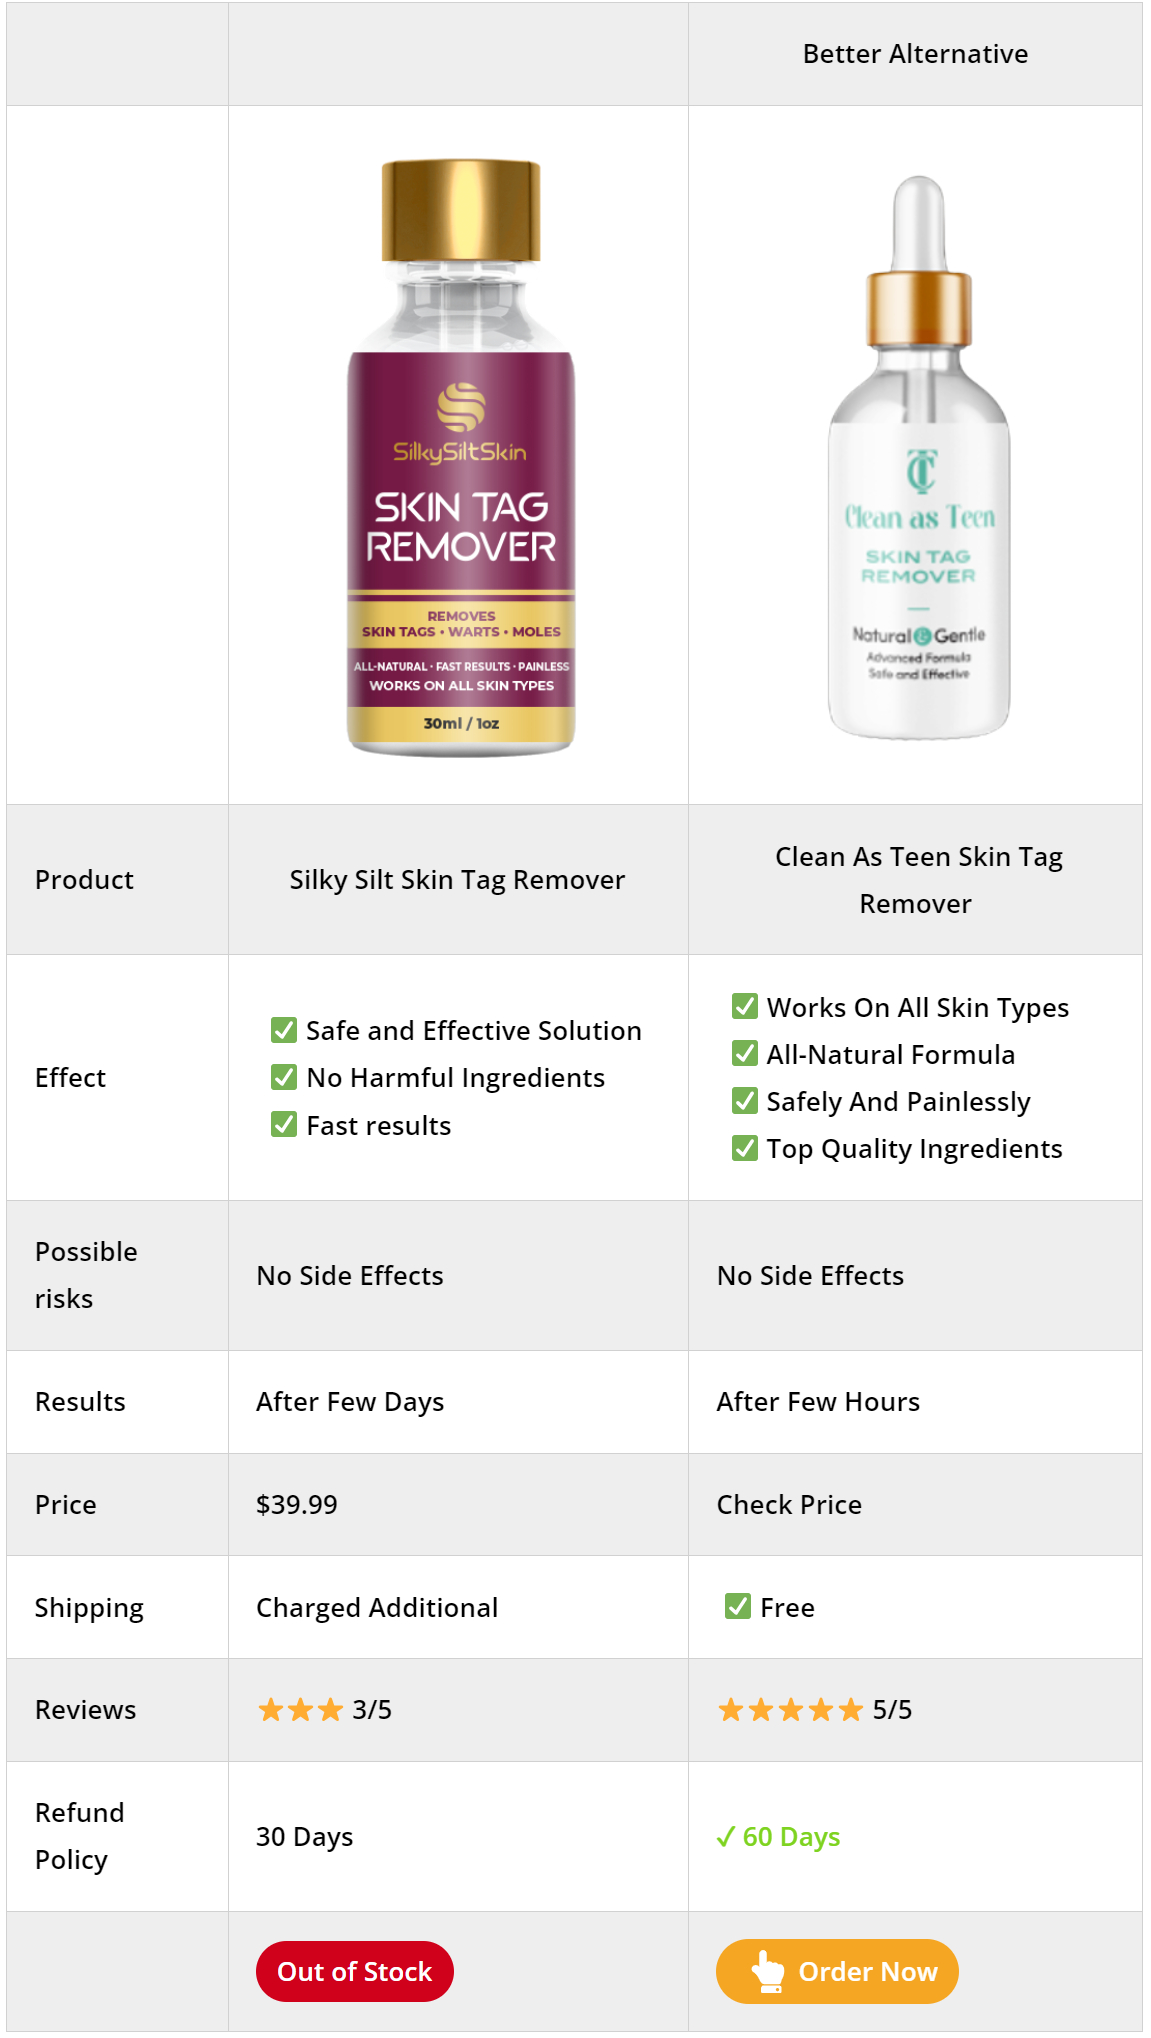 Silky Silt Skin Tag Remover